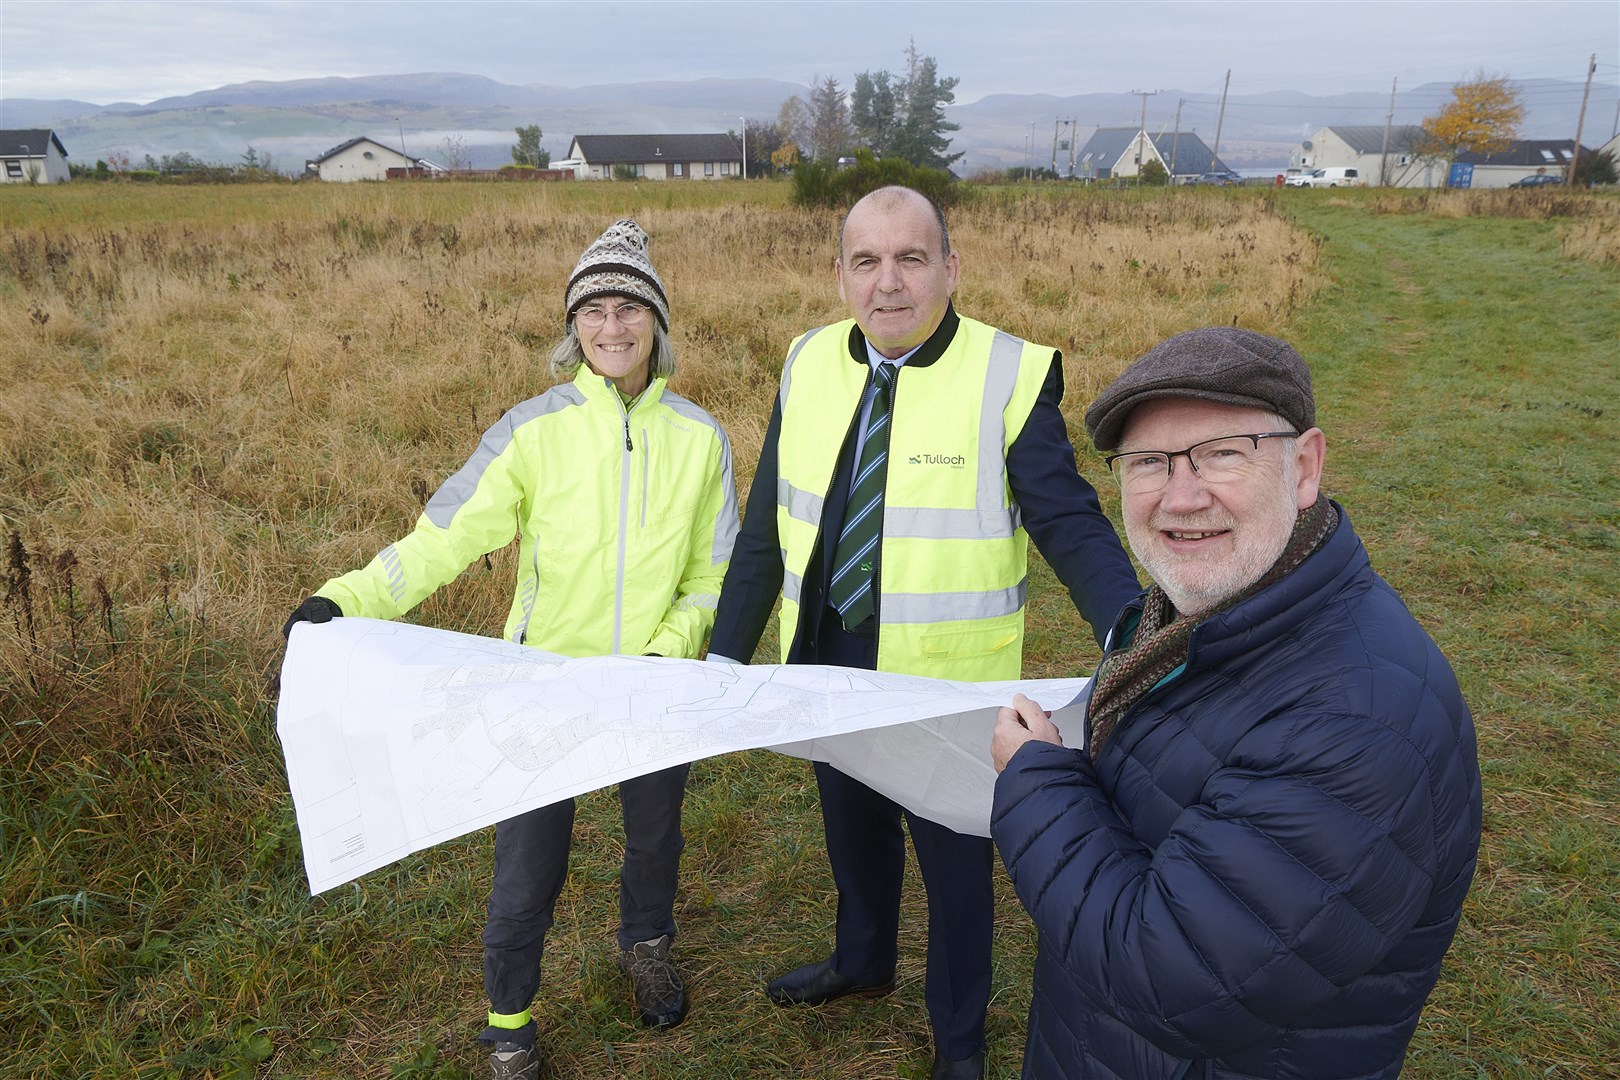 Pictured at the site are Jenny Edwards, director of Culbokie Community Trust, Billy McKay, Tulloch Homes construction director and Richard Fyfe, Trust chairman.